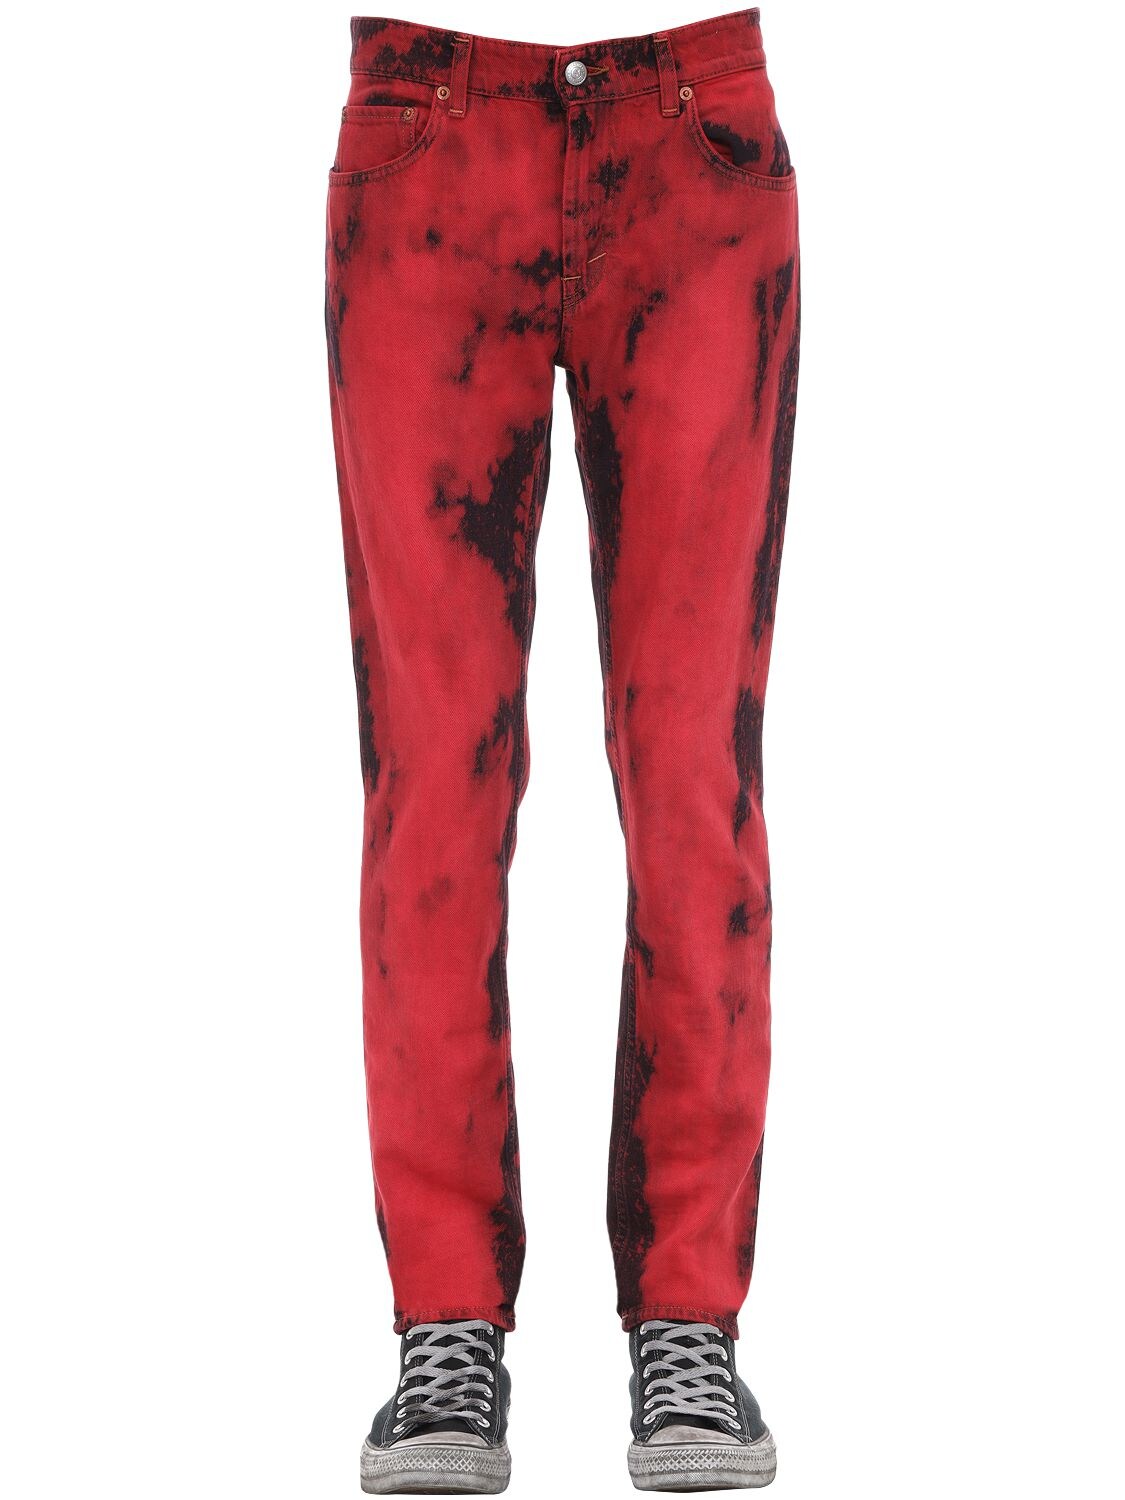 Department Five Skeith Cotton Pants In Red